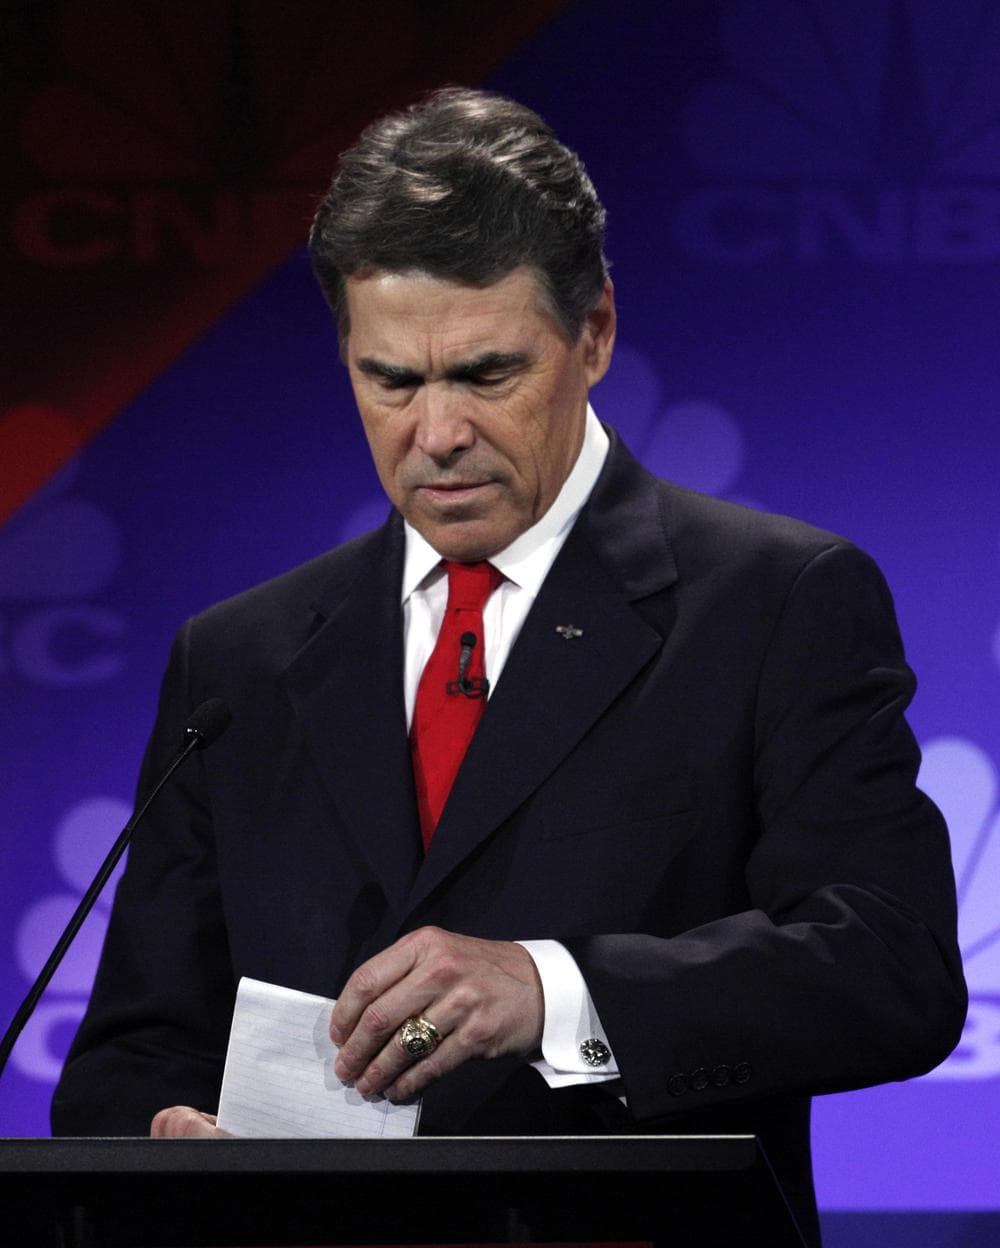 Republican presidential candidate Texas Gov. Rick Perry looks at his notes during a Republican Presidential Debate at Oakland University in Auburn Hills, Mich., Wednesday night. (AP)